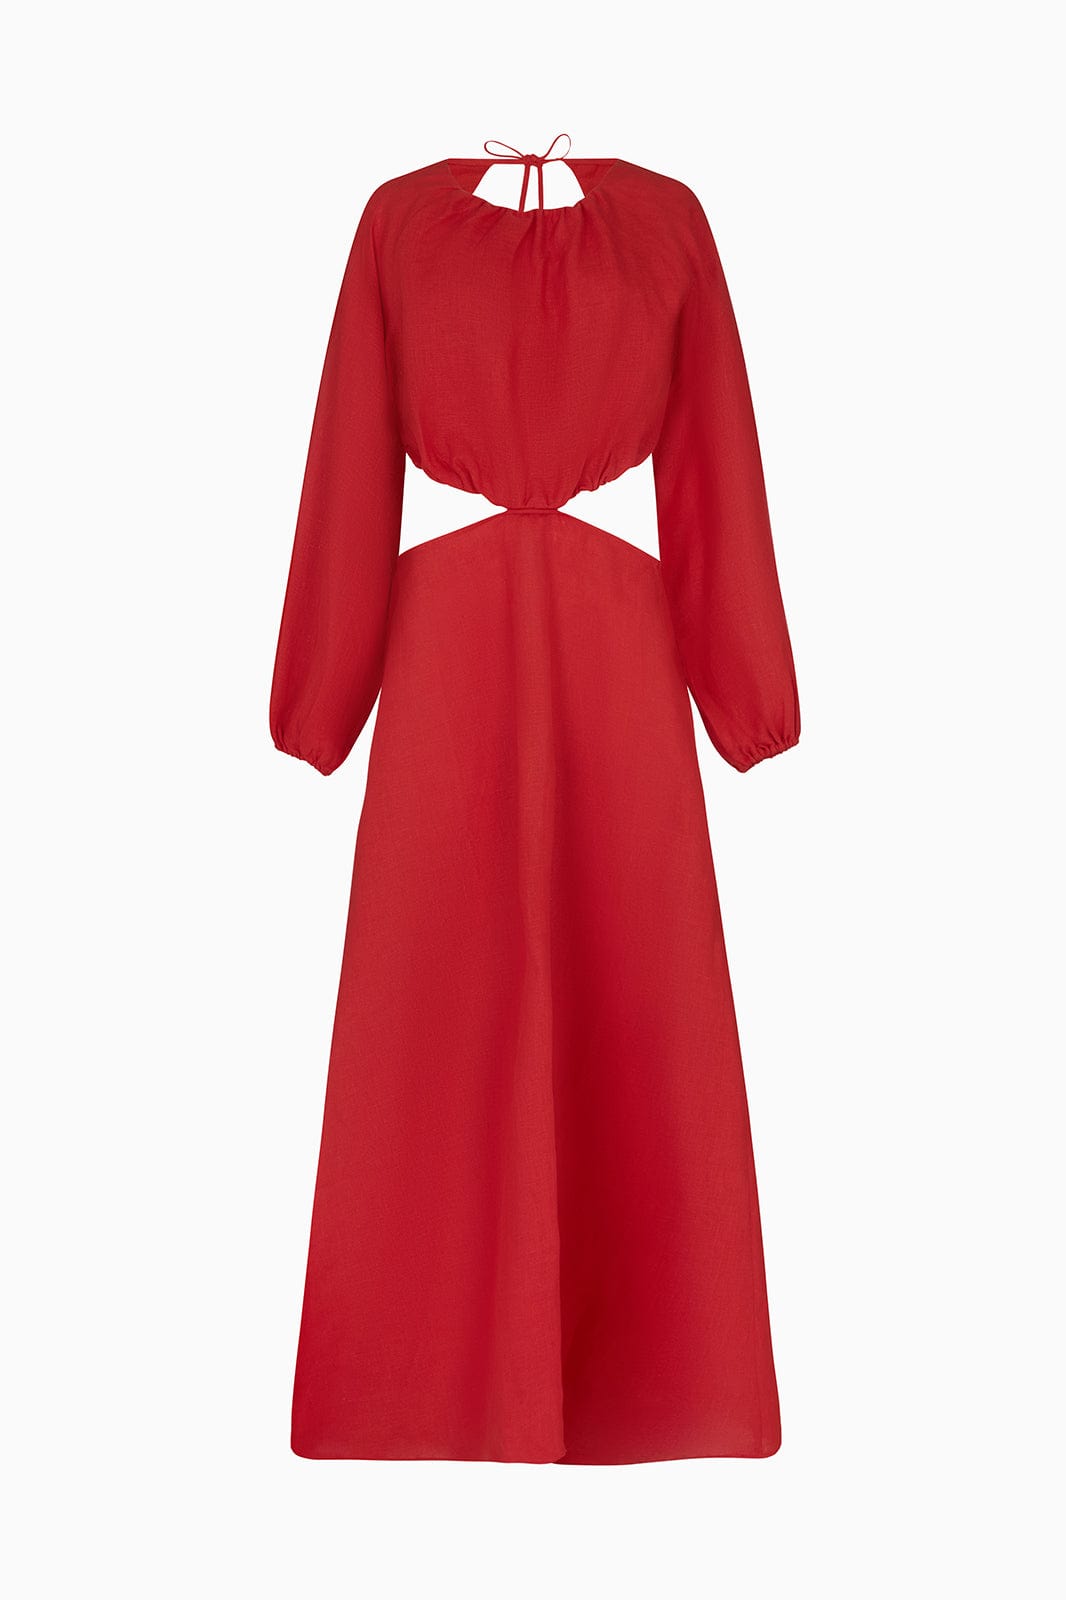 arkitaip Maxi Dresses The Emilia Cut-Out Maxi Dress in red